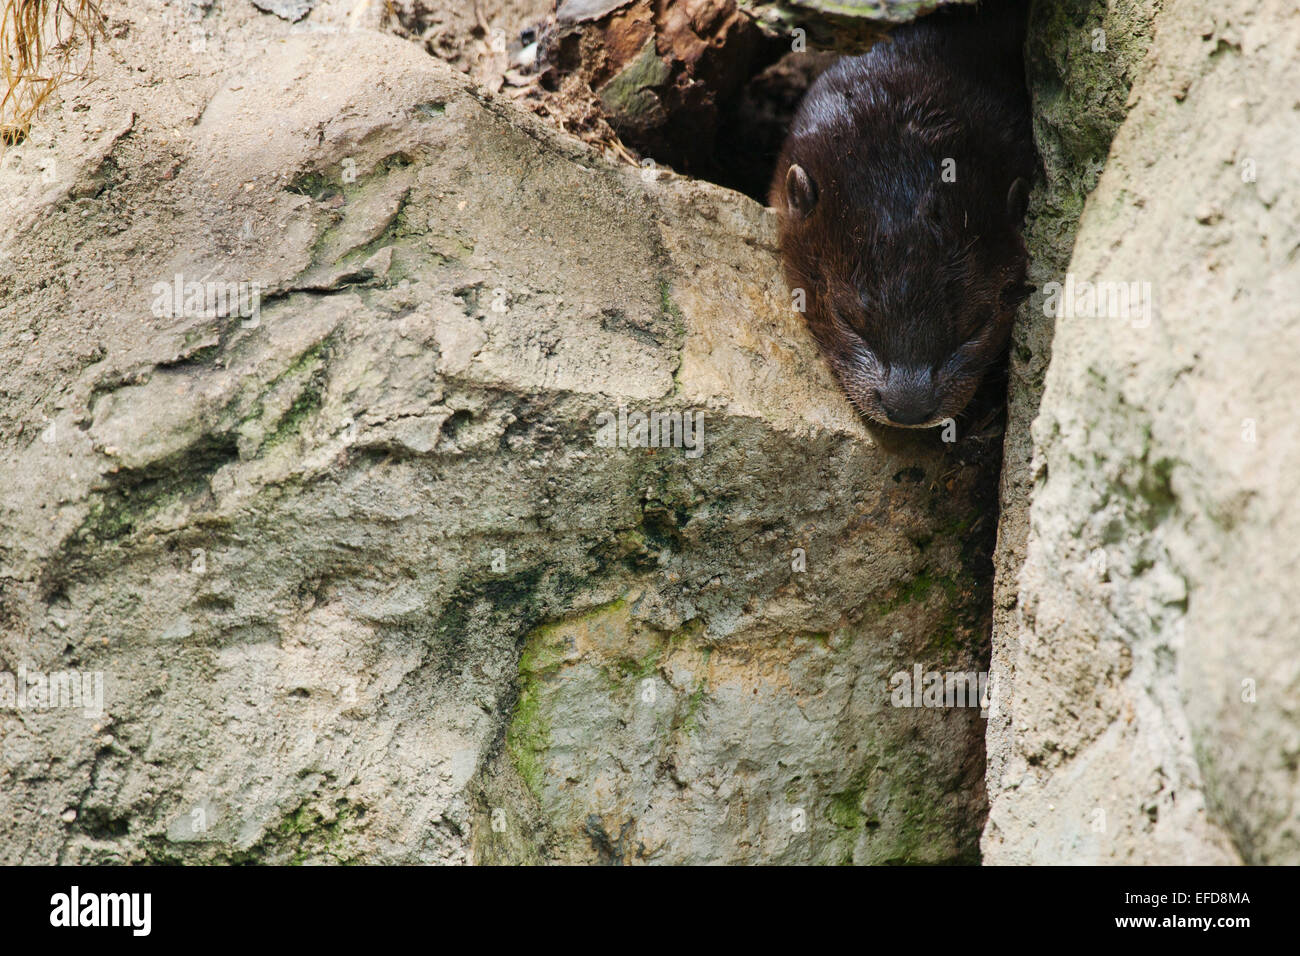 Spotted-necked Otter resting in gap in rocks (Hydrictis maculicollis)  Captive Stock Photo